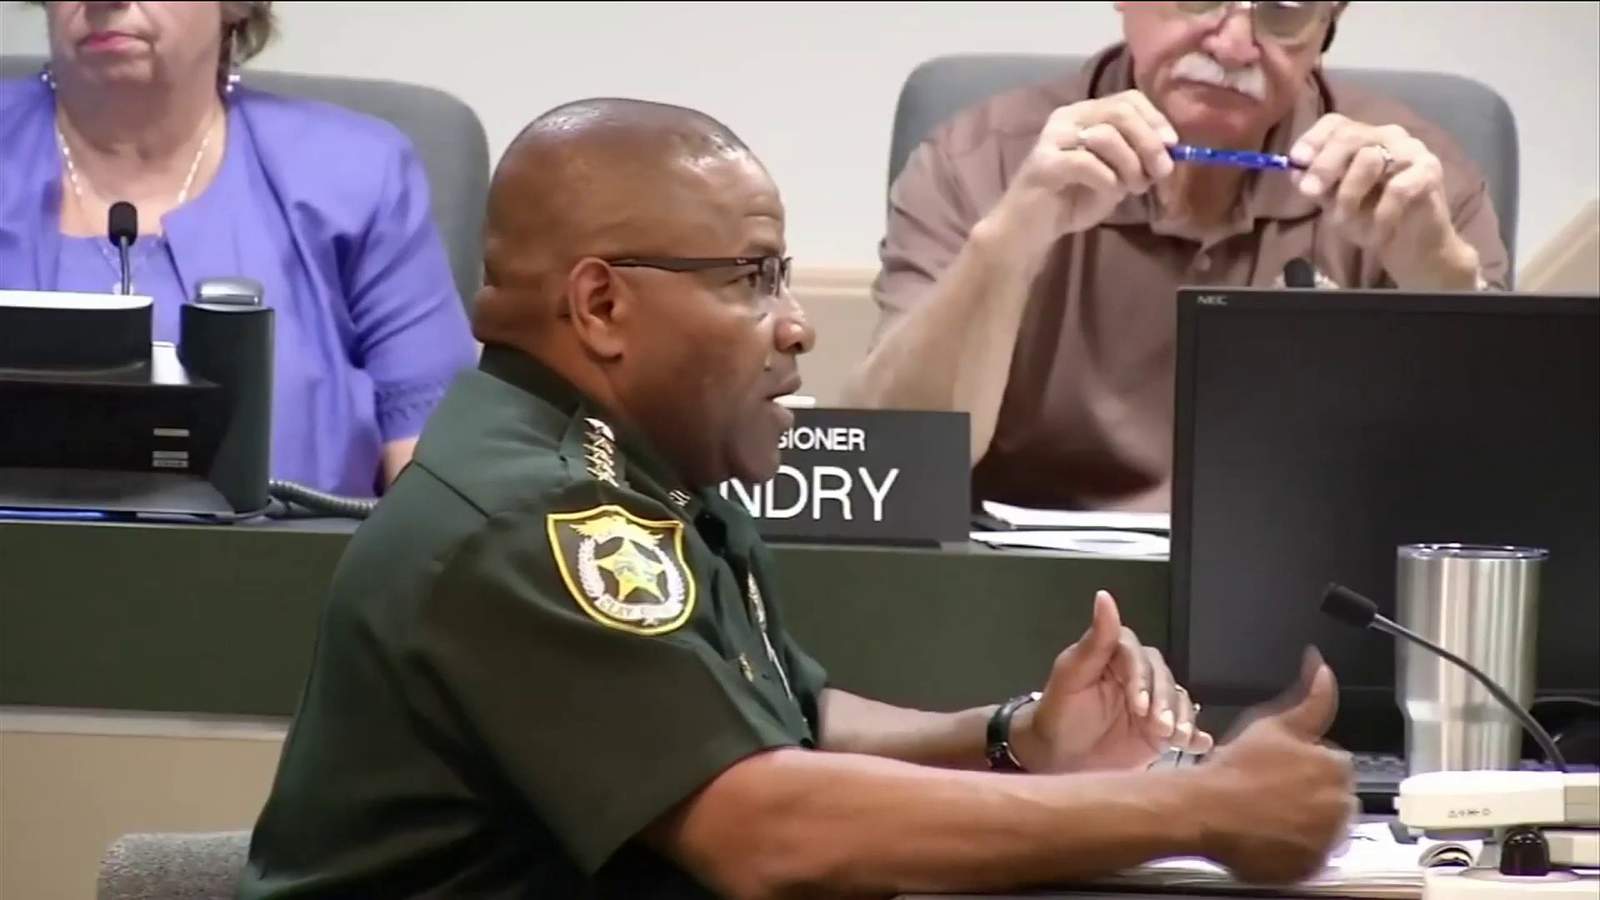 Former Clay sheriff facing charges pressured staff for campaign contributions, FDLE says